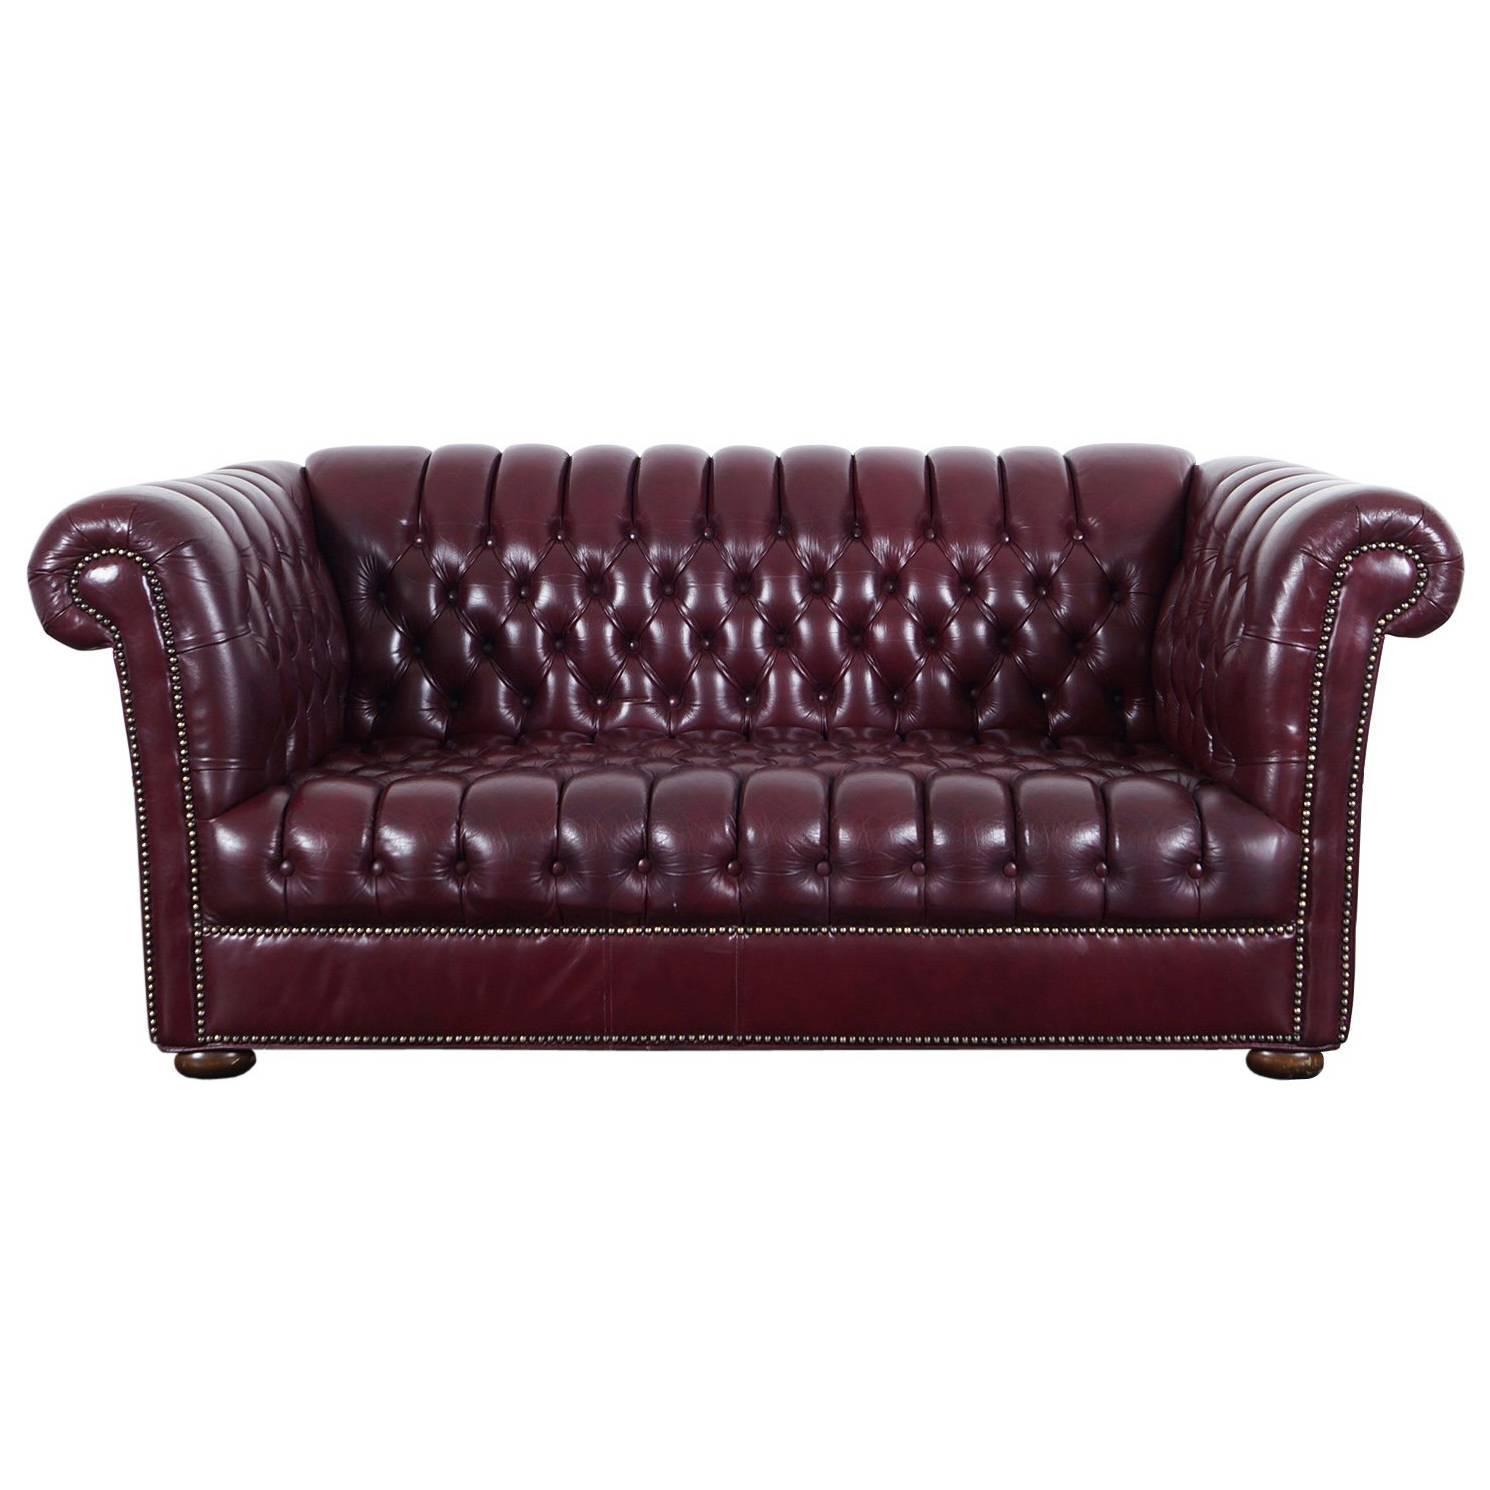 Vintage Burgundy Leather Chesterfield Loveseat For Sale At 1stdibs